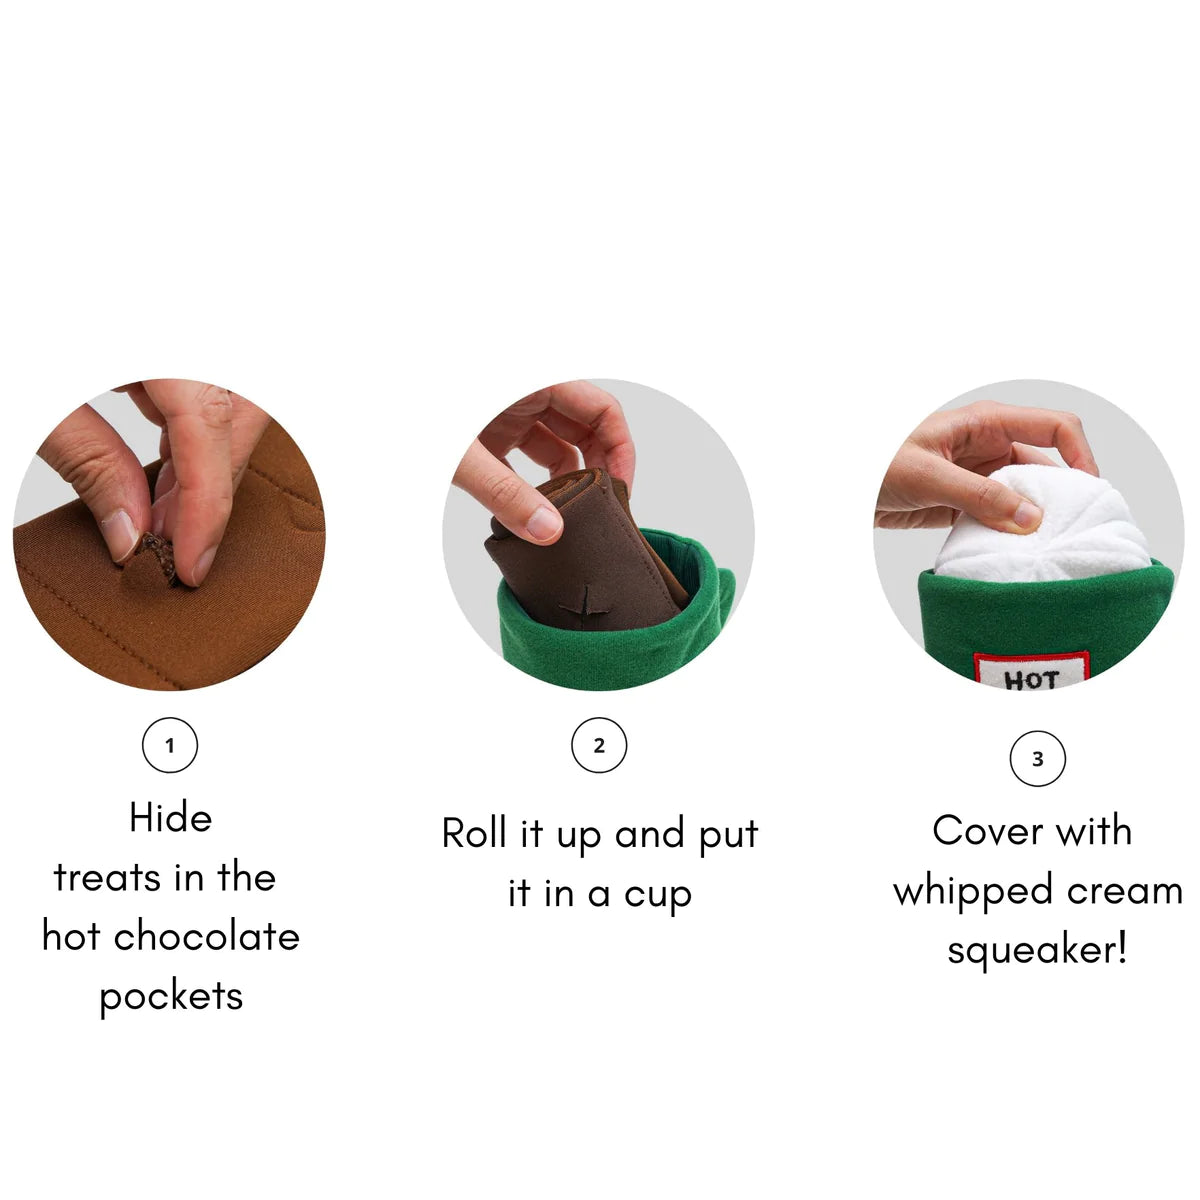 Hot Chocolate Nosework Toy